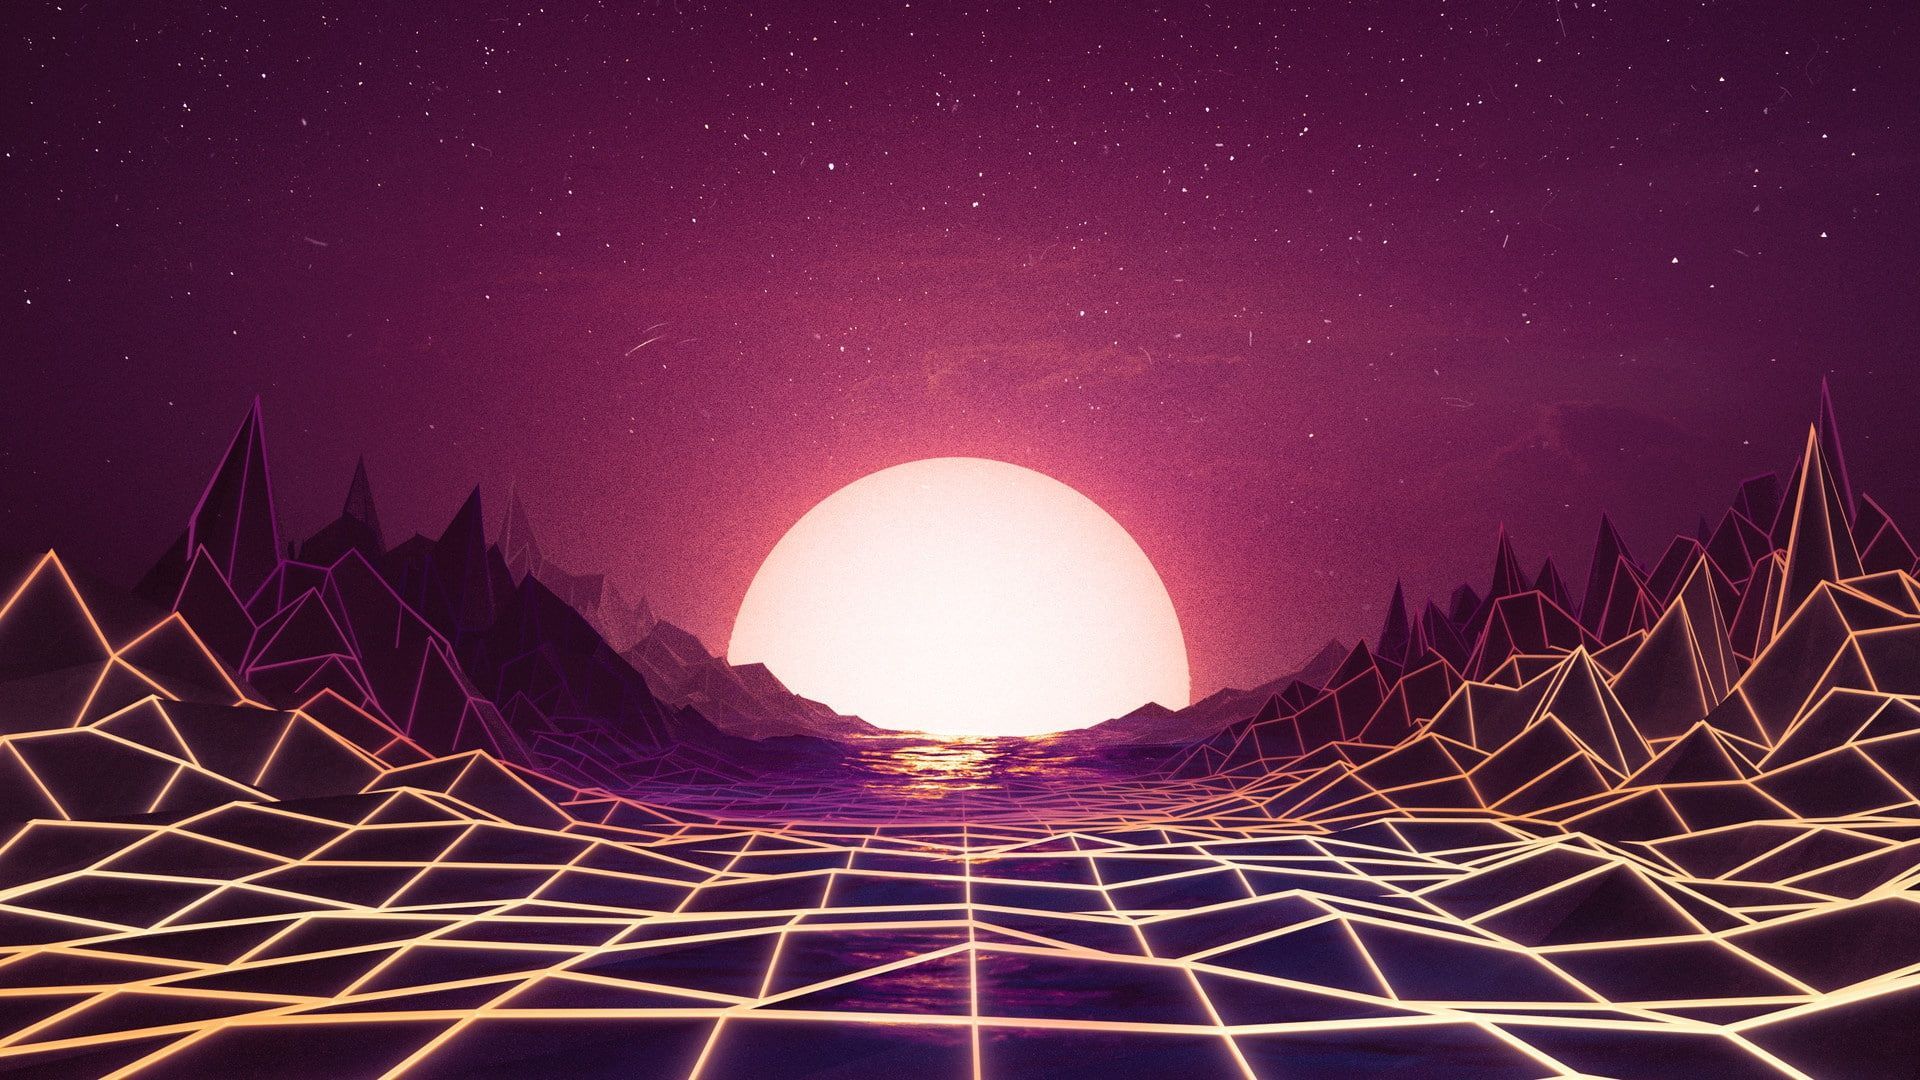 Sunset The sun #Music #Space #Star #Background #Neon 's #Synth #Retrowave #Synthwave New Retro Wave #Futuresy. Background neon, Wallpaper, Synthwave wallpaper